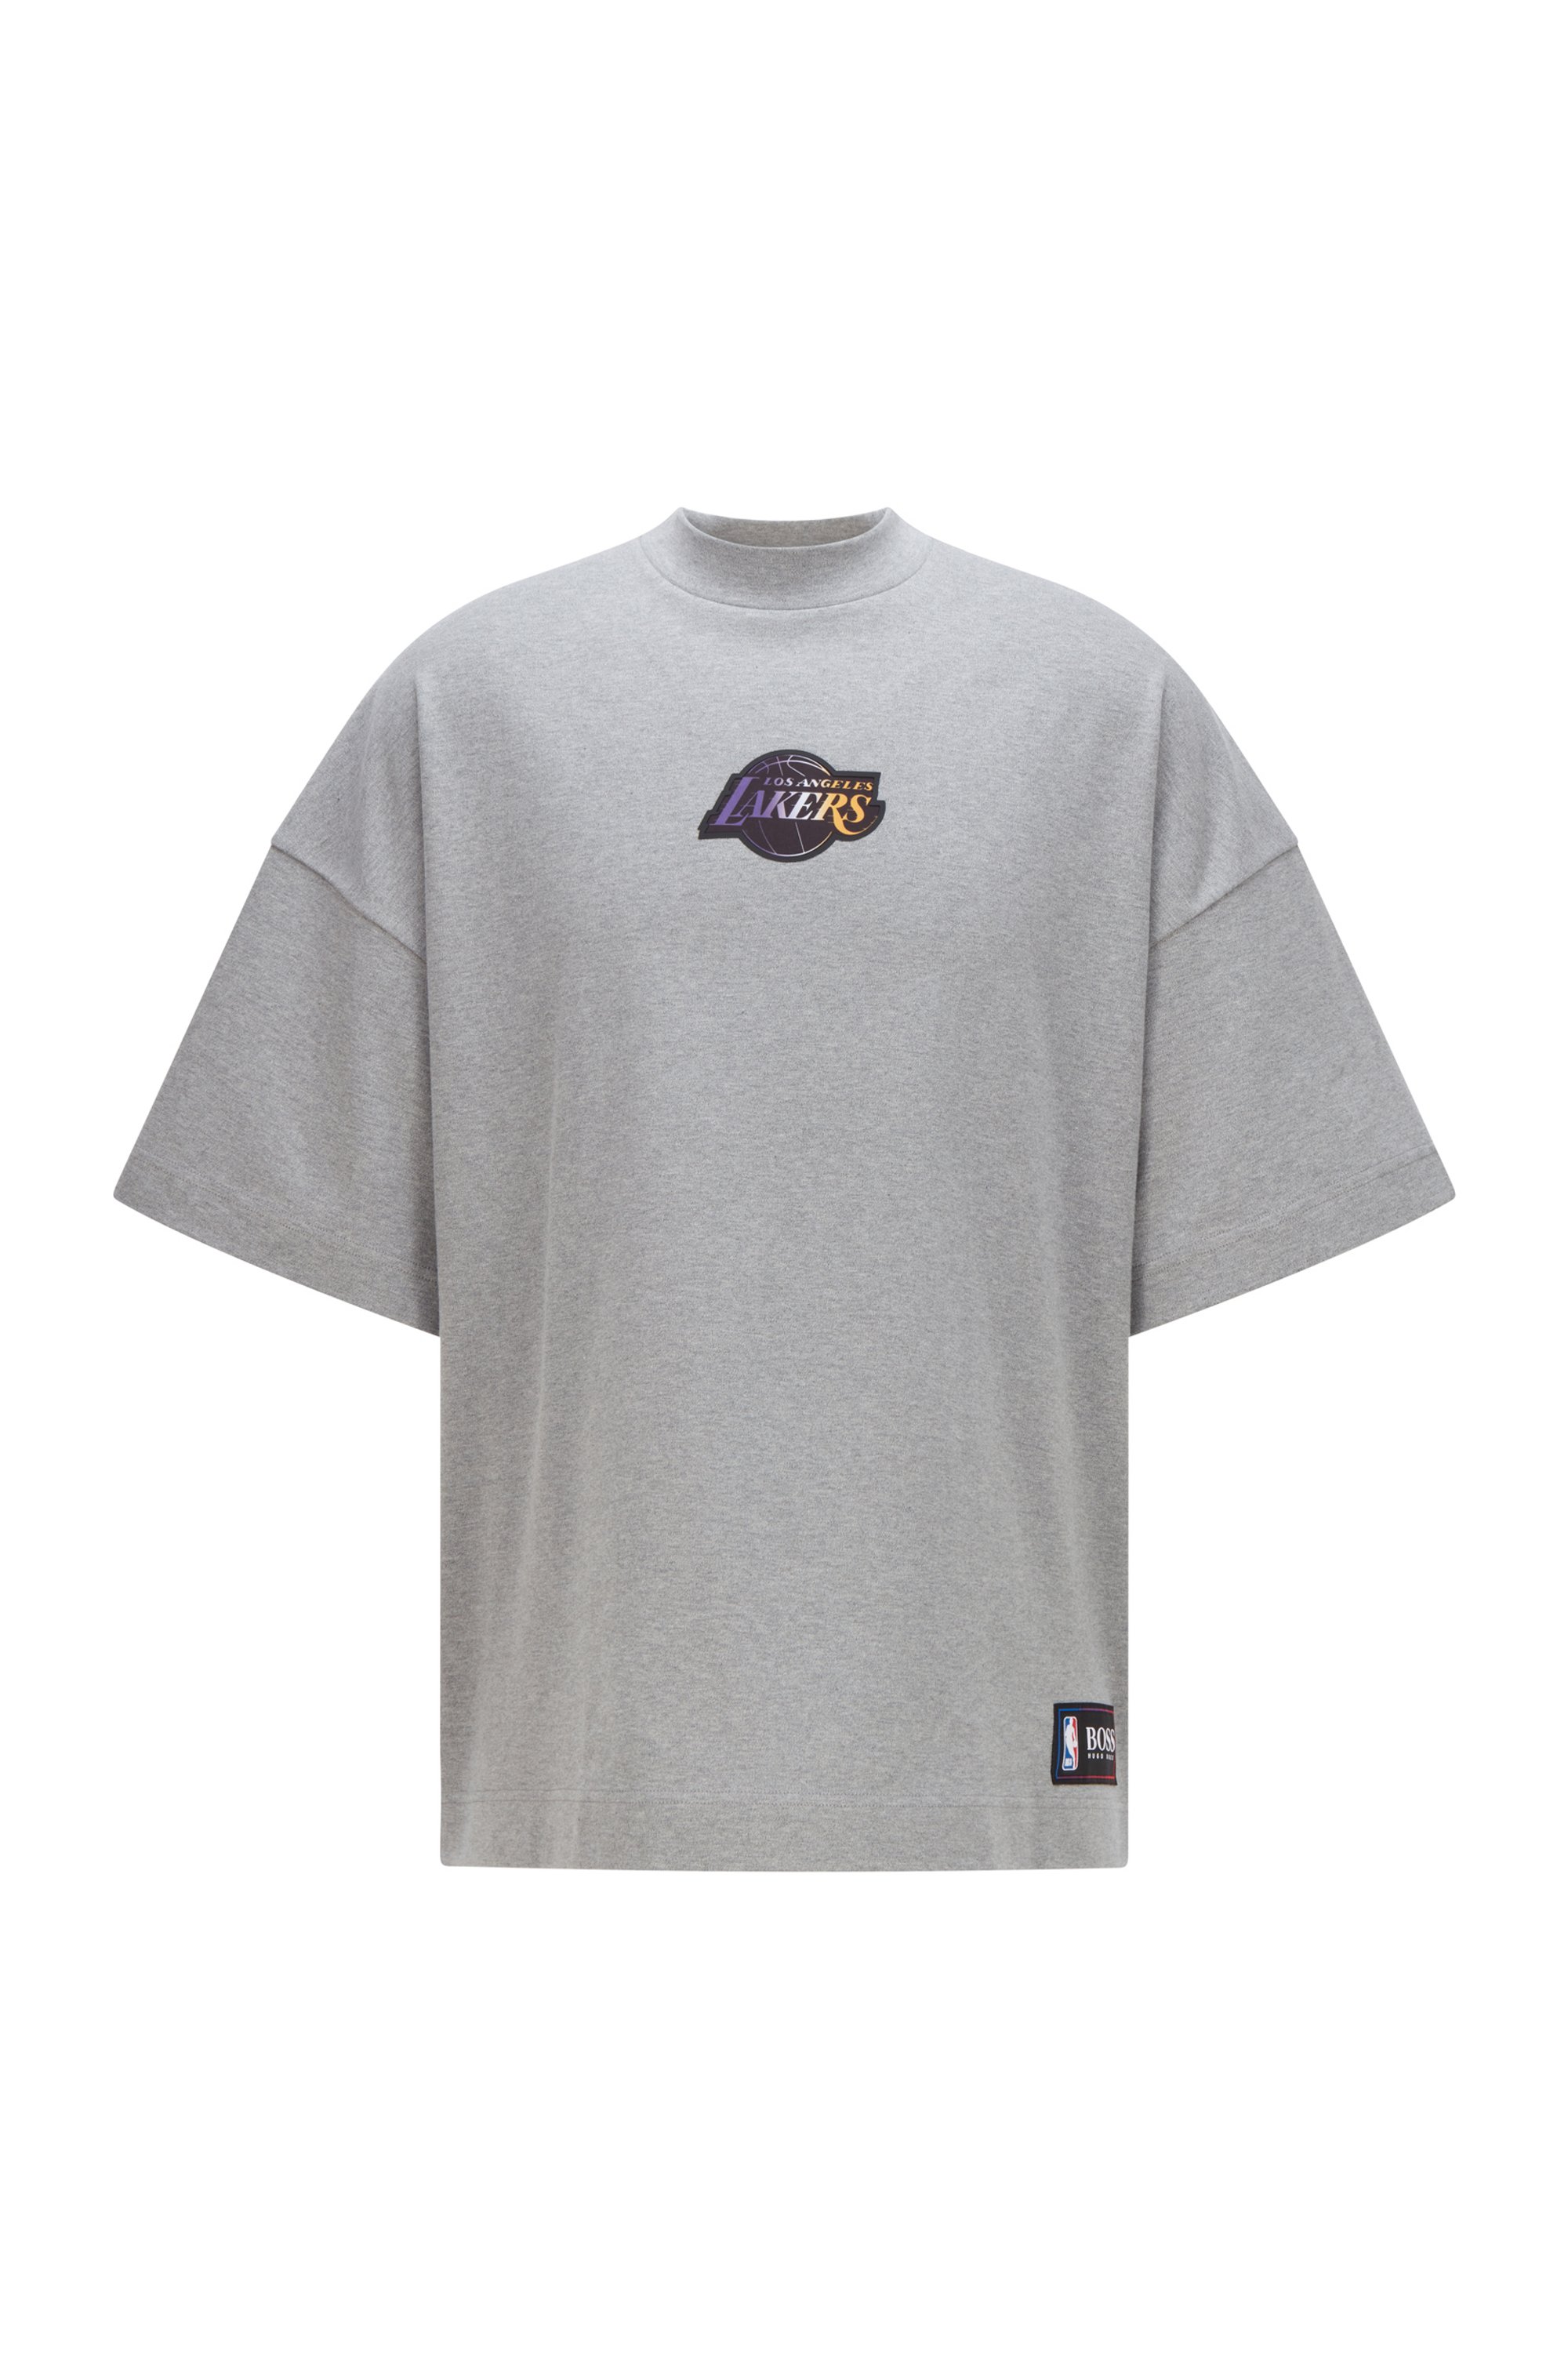 BOSS x NBA relaxed-fit T-shirt with colorful branding, NBA Lakers